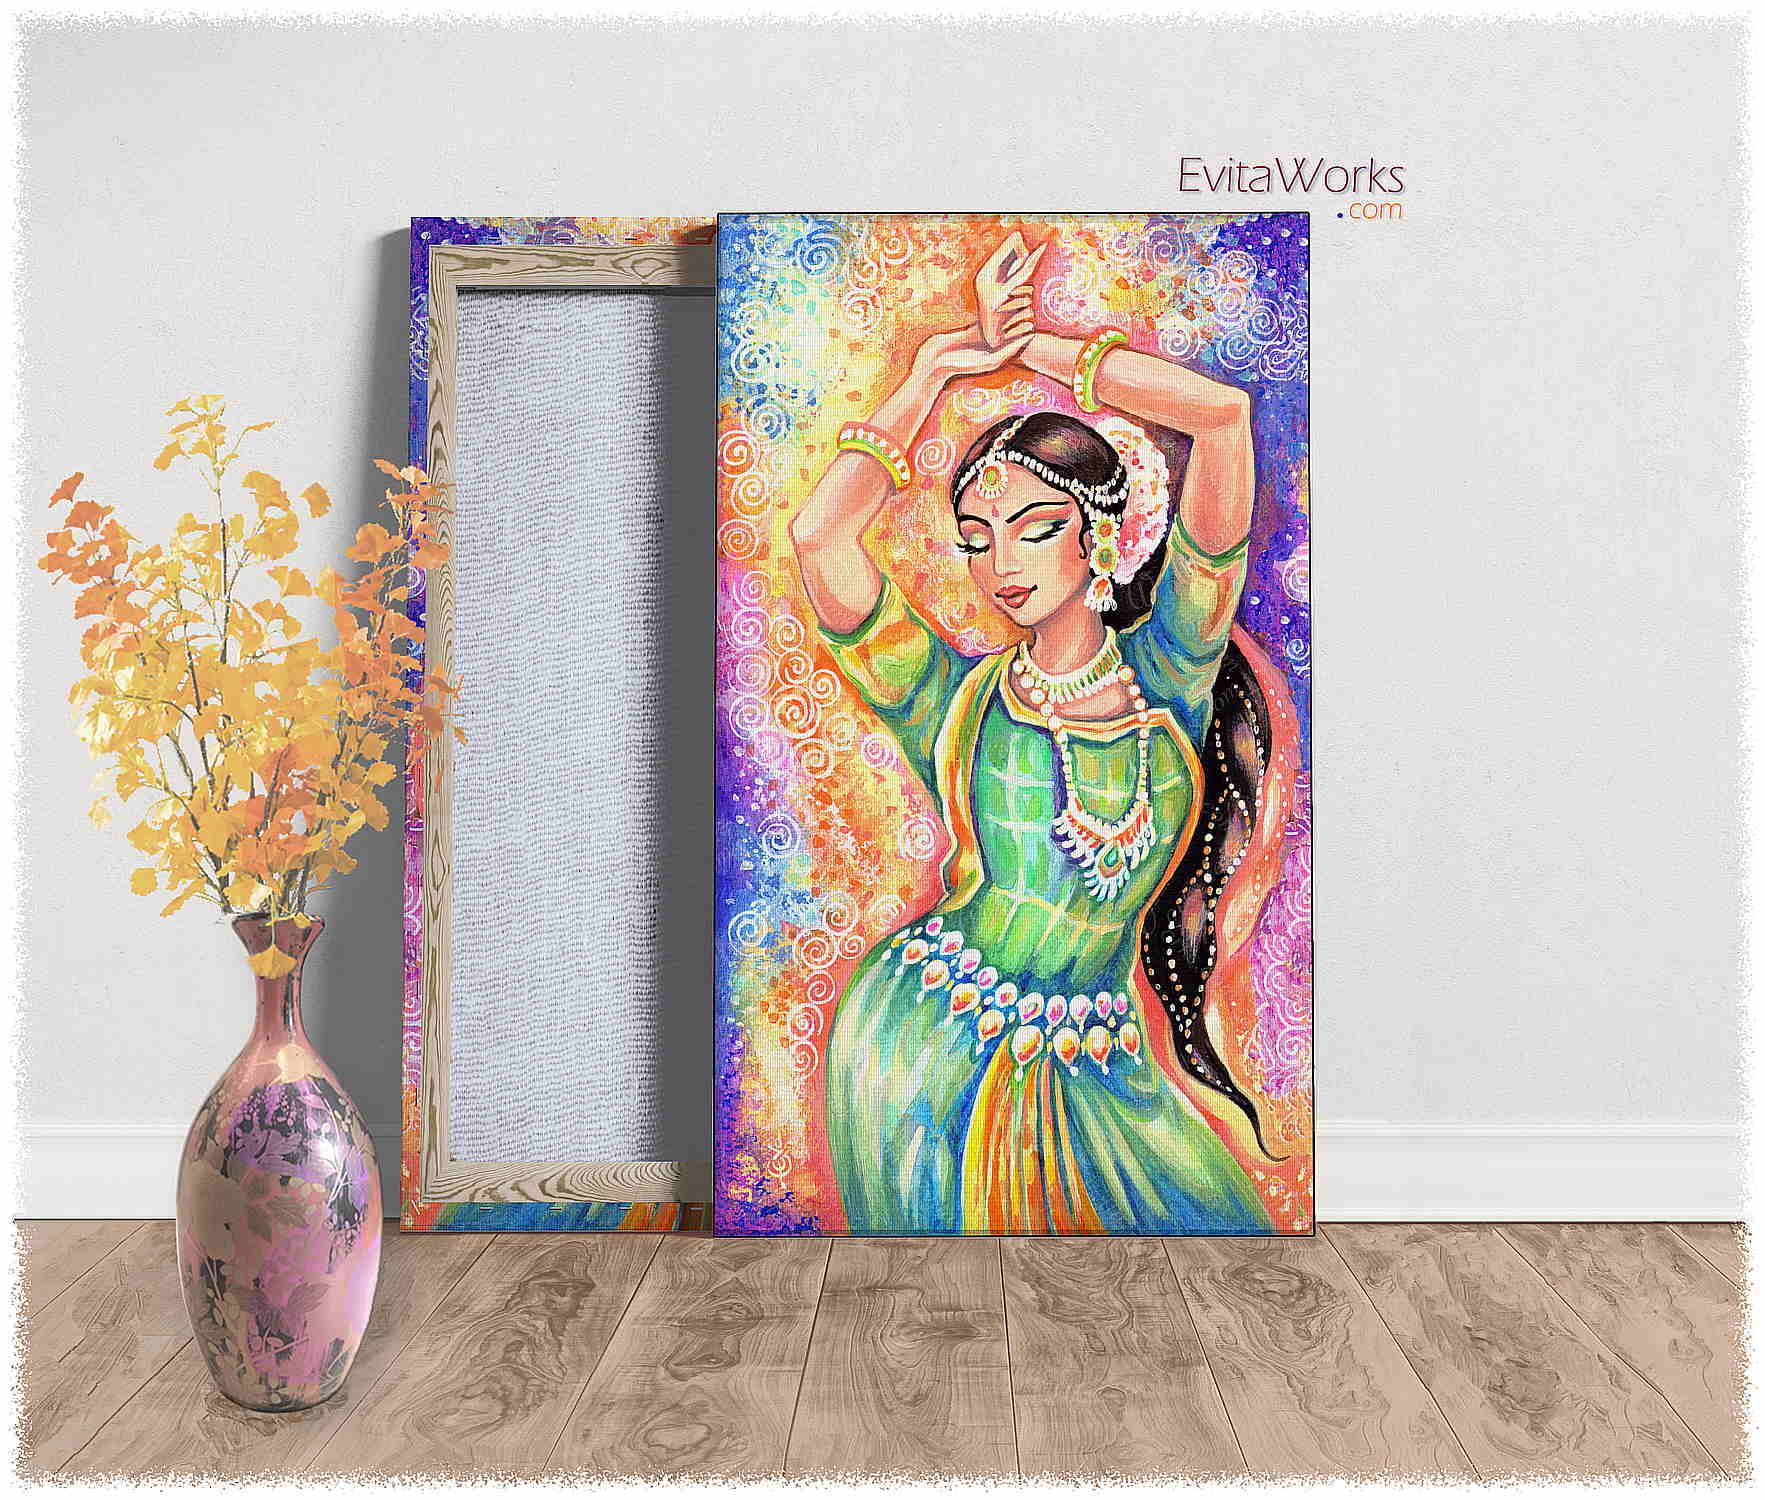 Hit to learn about "Light of Ishwari, Indian dancer" on canvases